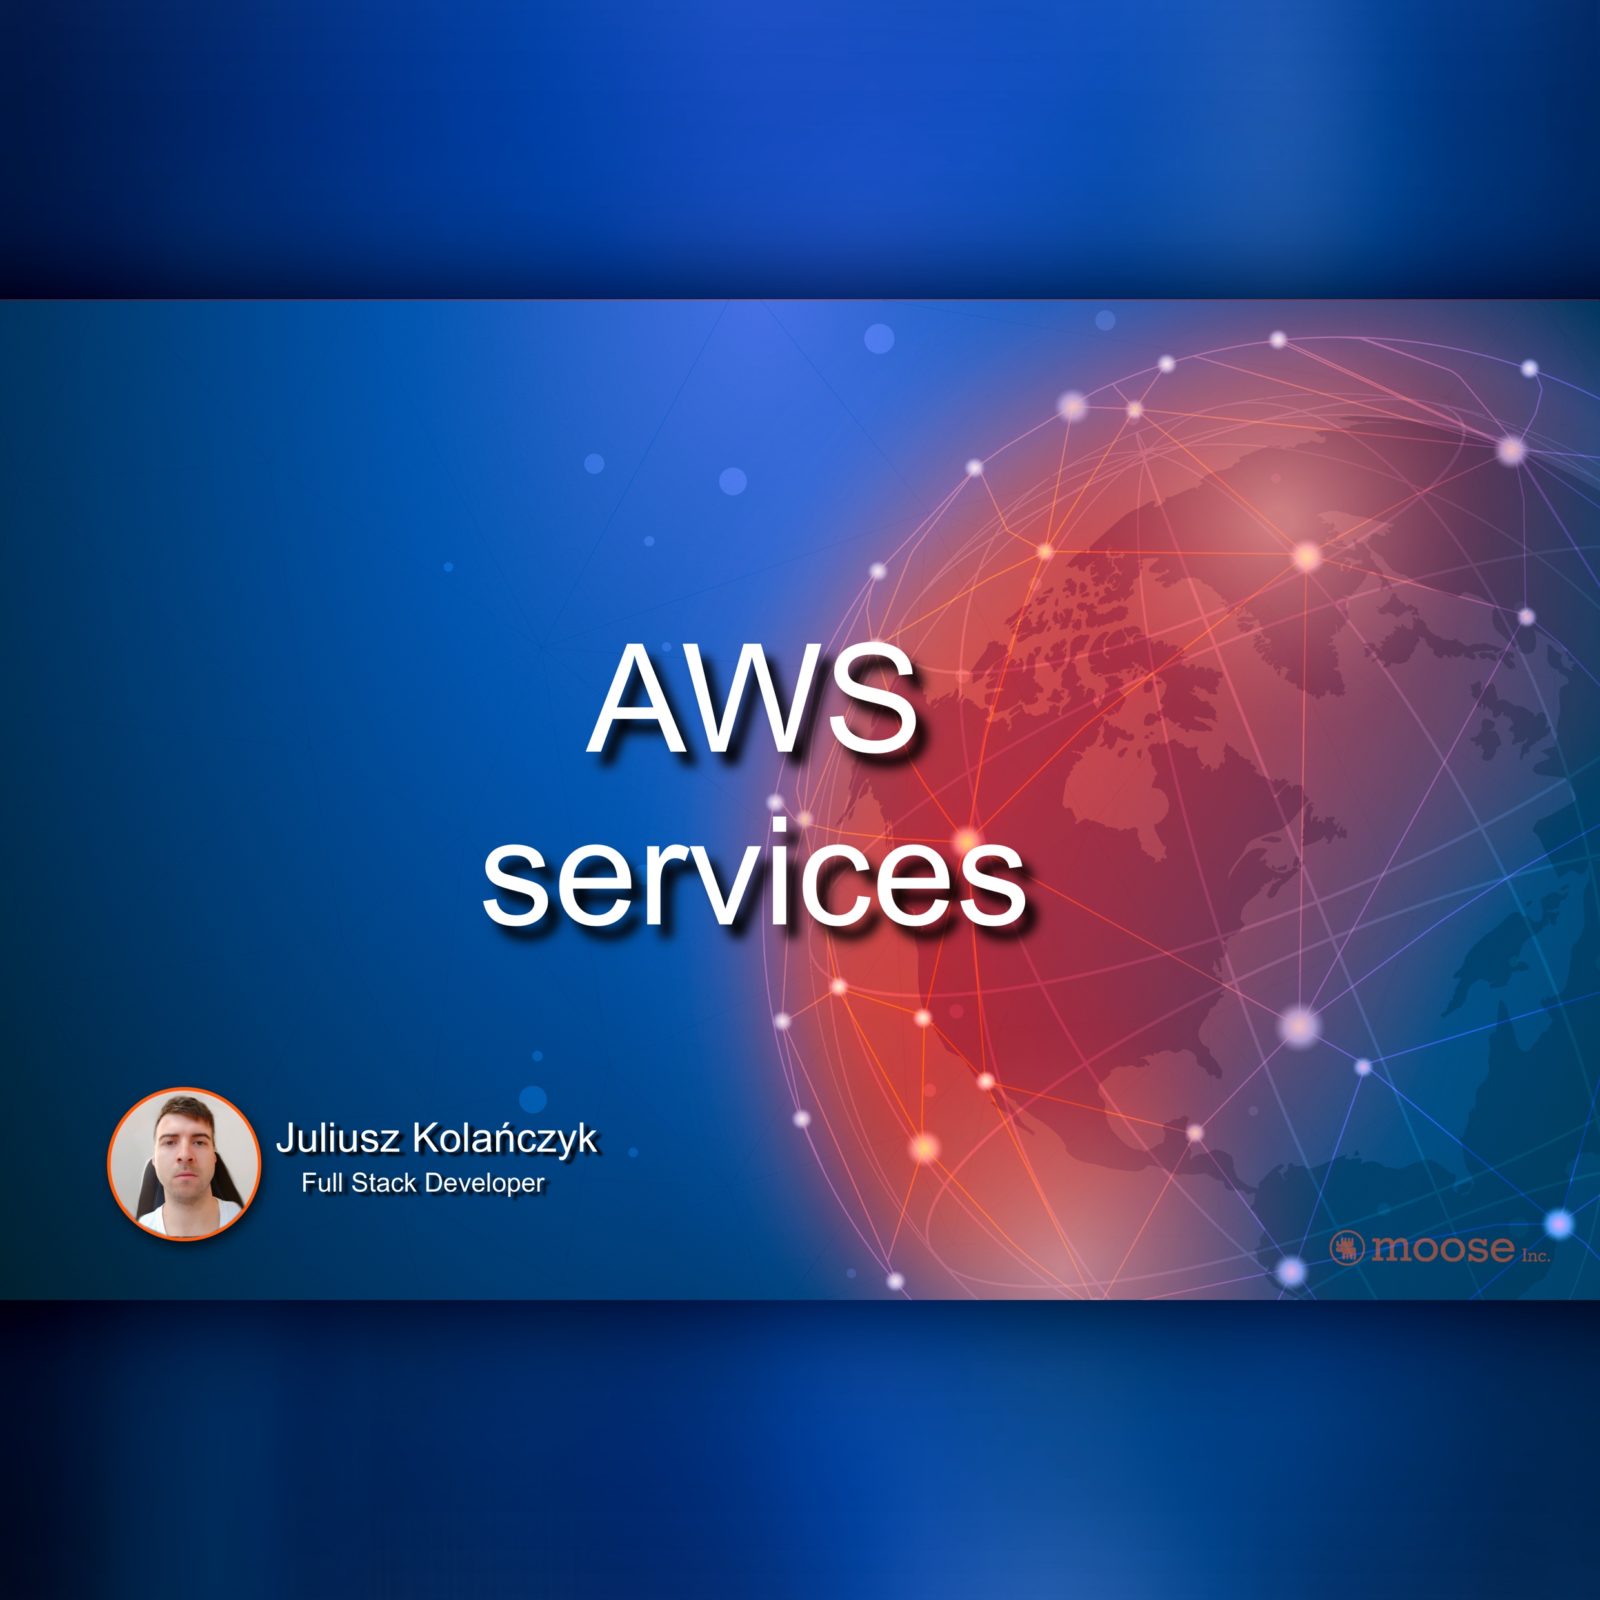 aws, aws services, solutions, trends, software, dedicated software